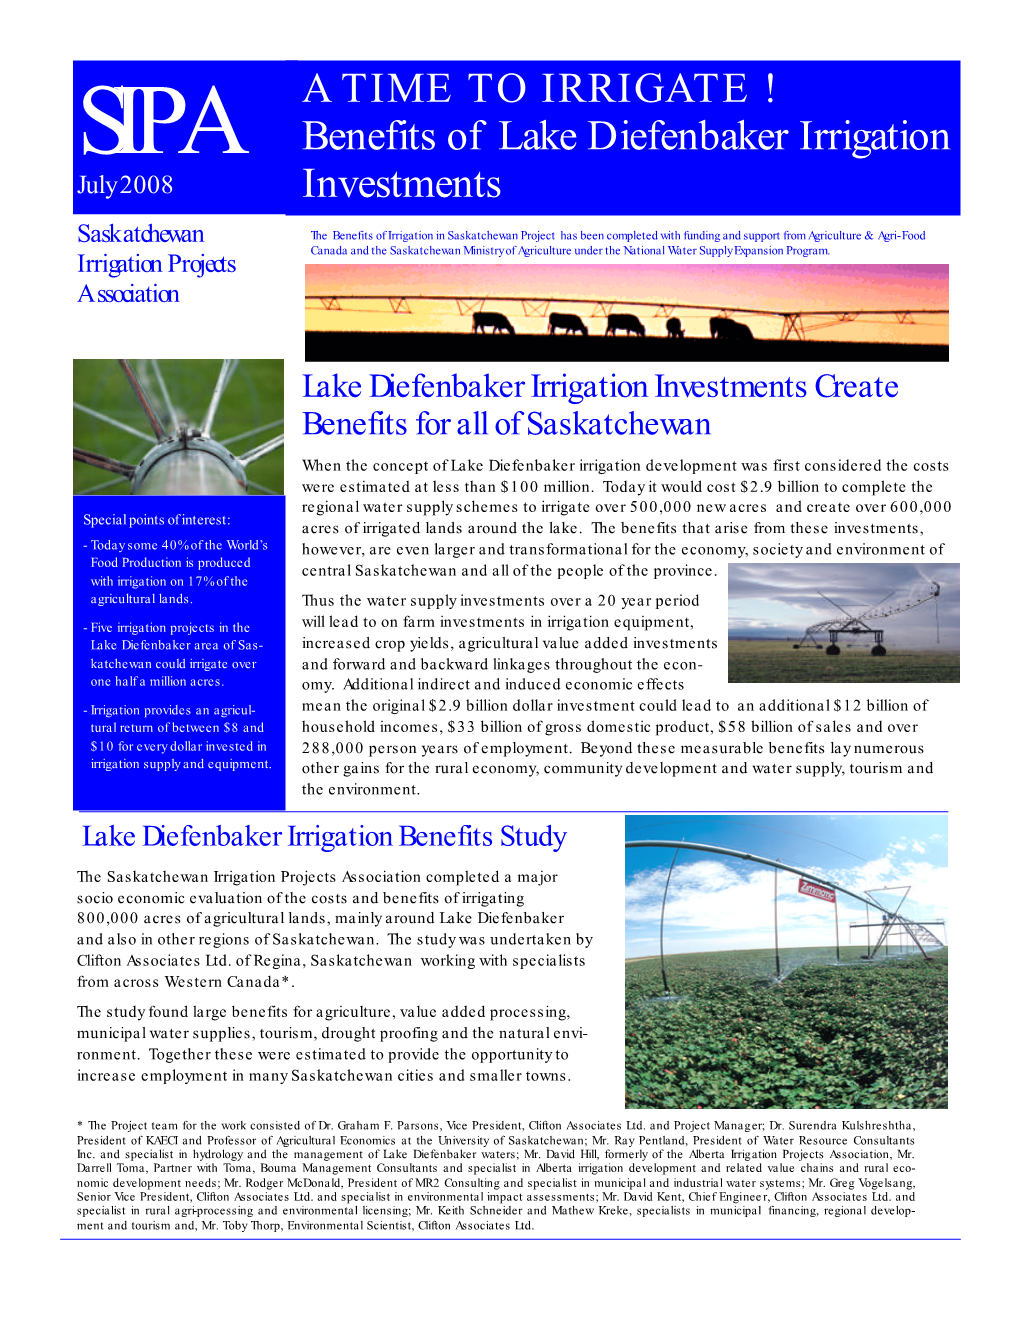 Benefits of Lake Diefenbaker Irrigation Investments